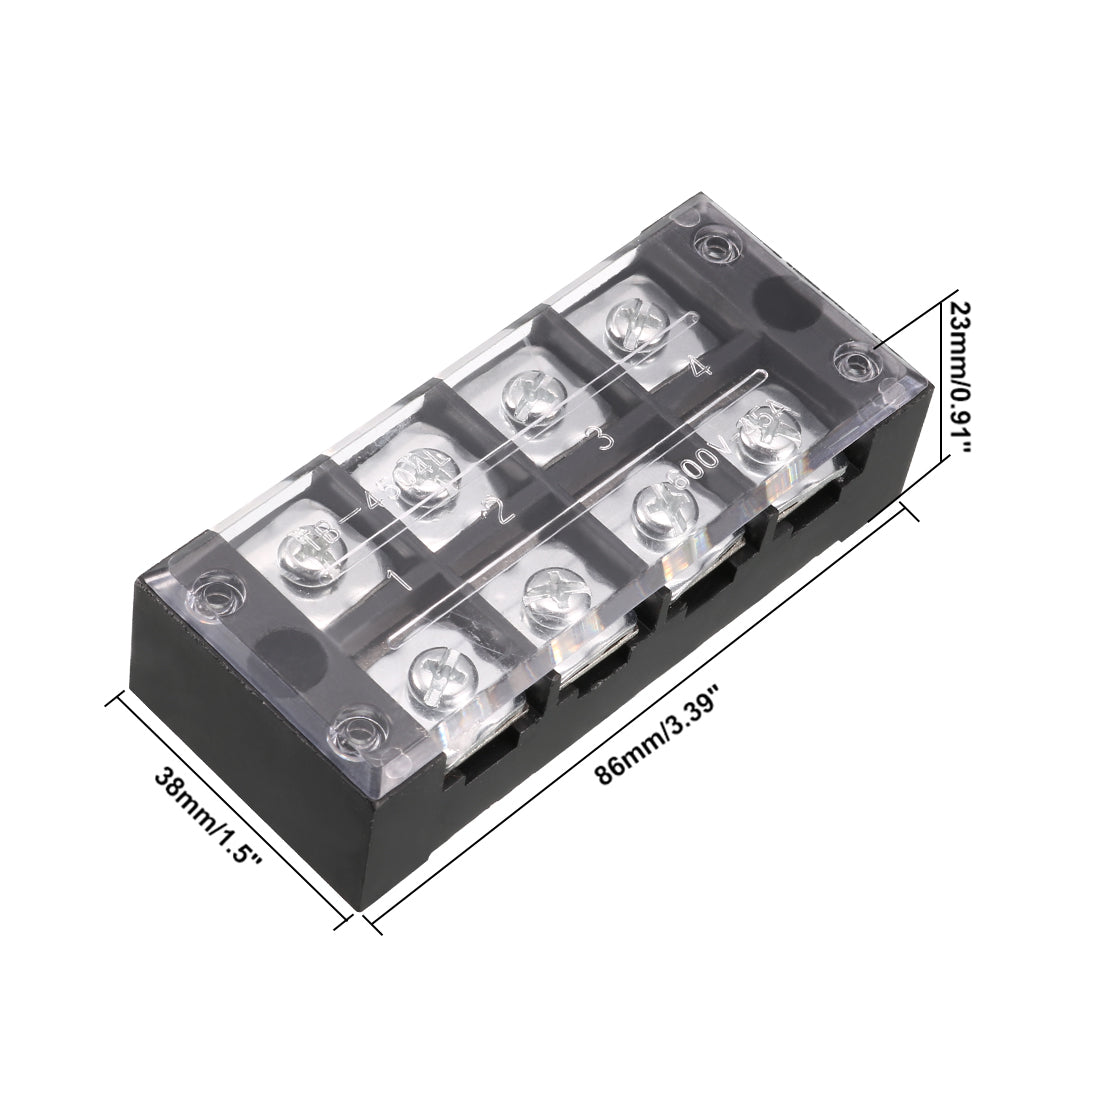 uxcell Uxcell Dual Rows 4 Positions 600V 45A Wire Barrier Block Terminal Strip TB-4504L